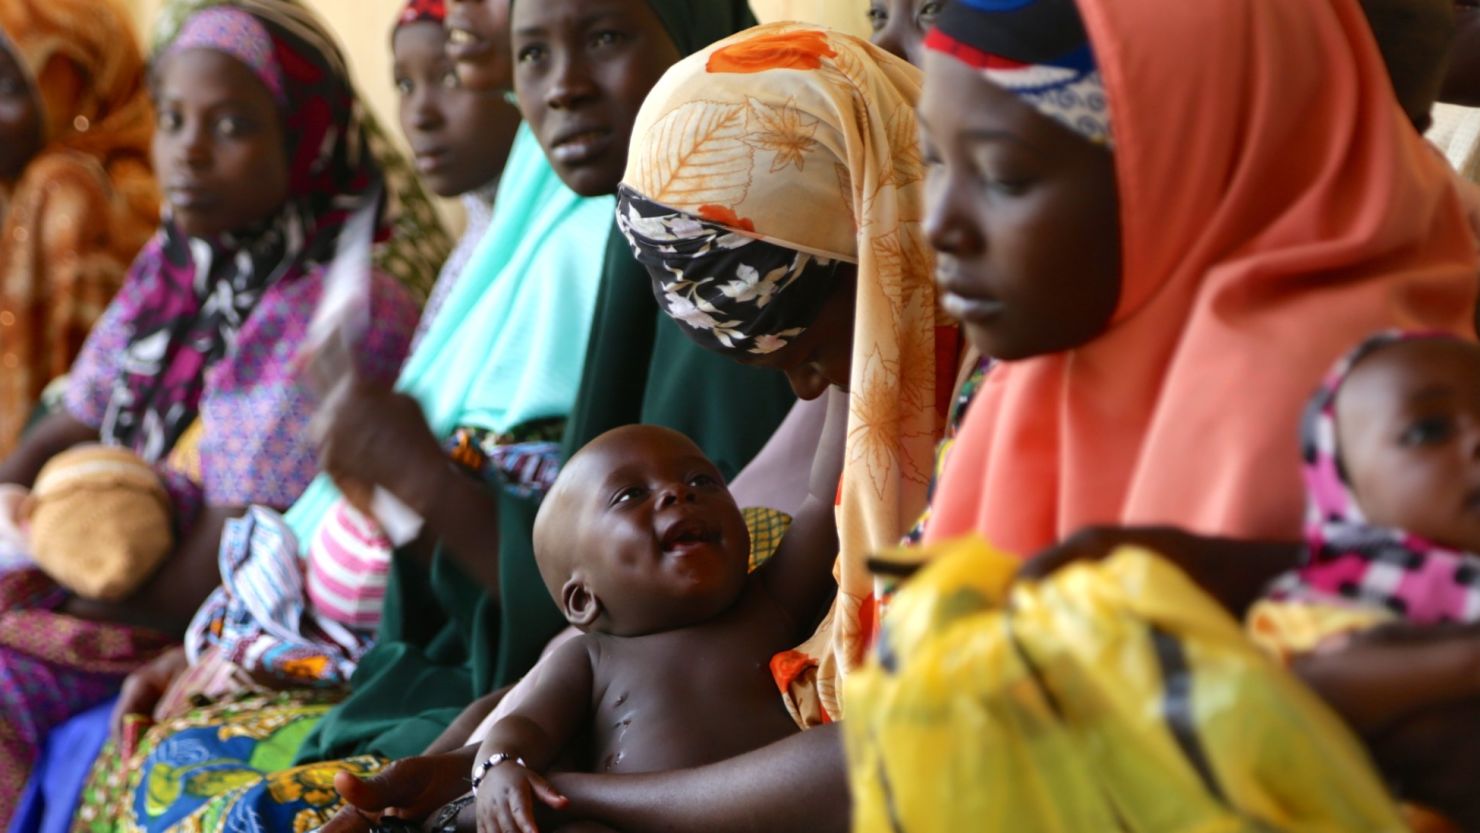 A huge immunization drive in Nigeria has meant there have been no new cases of polio for more than a year.